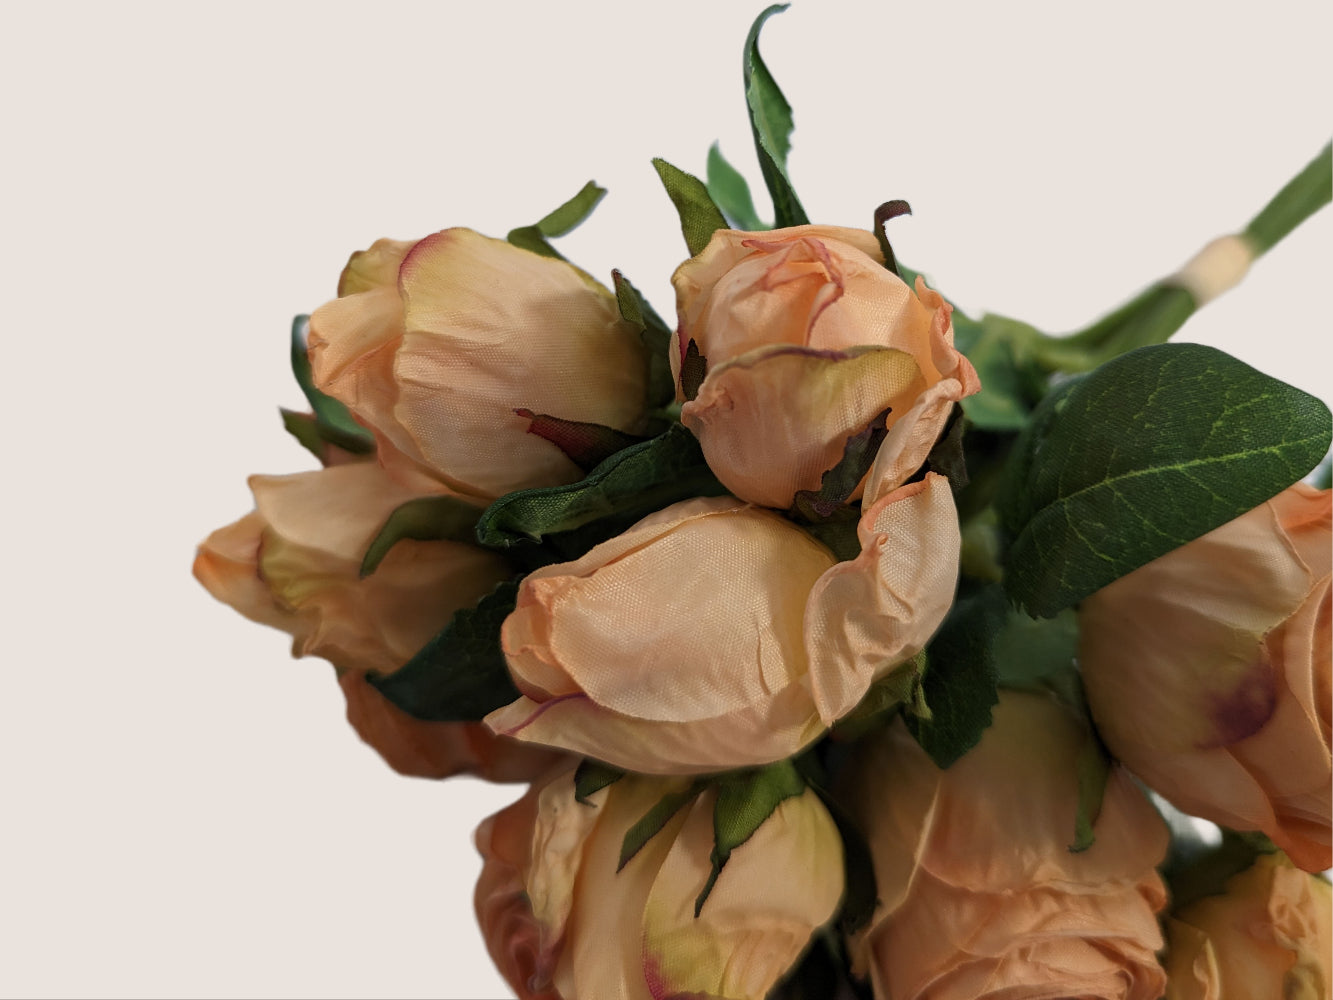 An image of a bouquet of 5 pink roses crafted to look like preserved roses instead of fresh ones. Each stem is 14 inches tall and features two flower heads per green stem. The flowers are pink with light brown edging to look dried, adding to the realistic appearance. The image is against a neutral beige background, showcasing the delicate beauty of the preserved roses.